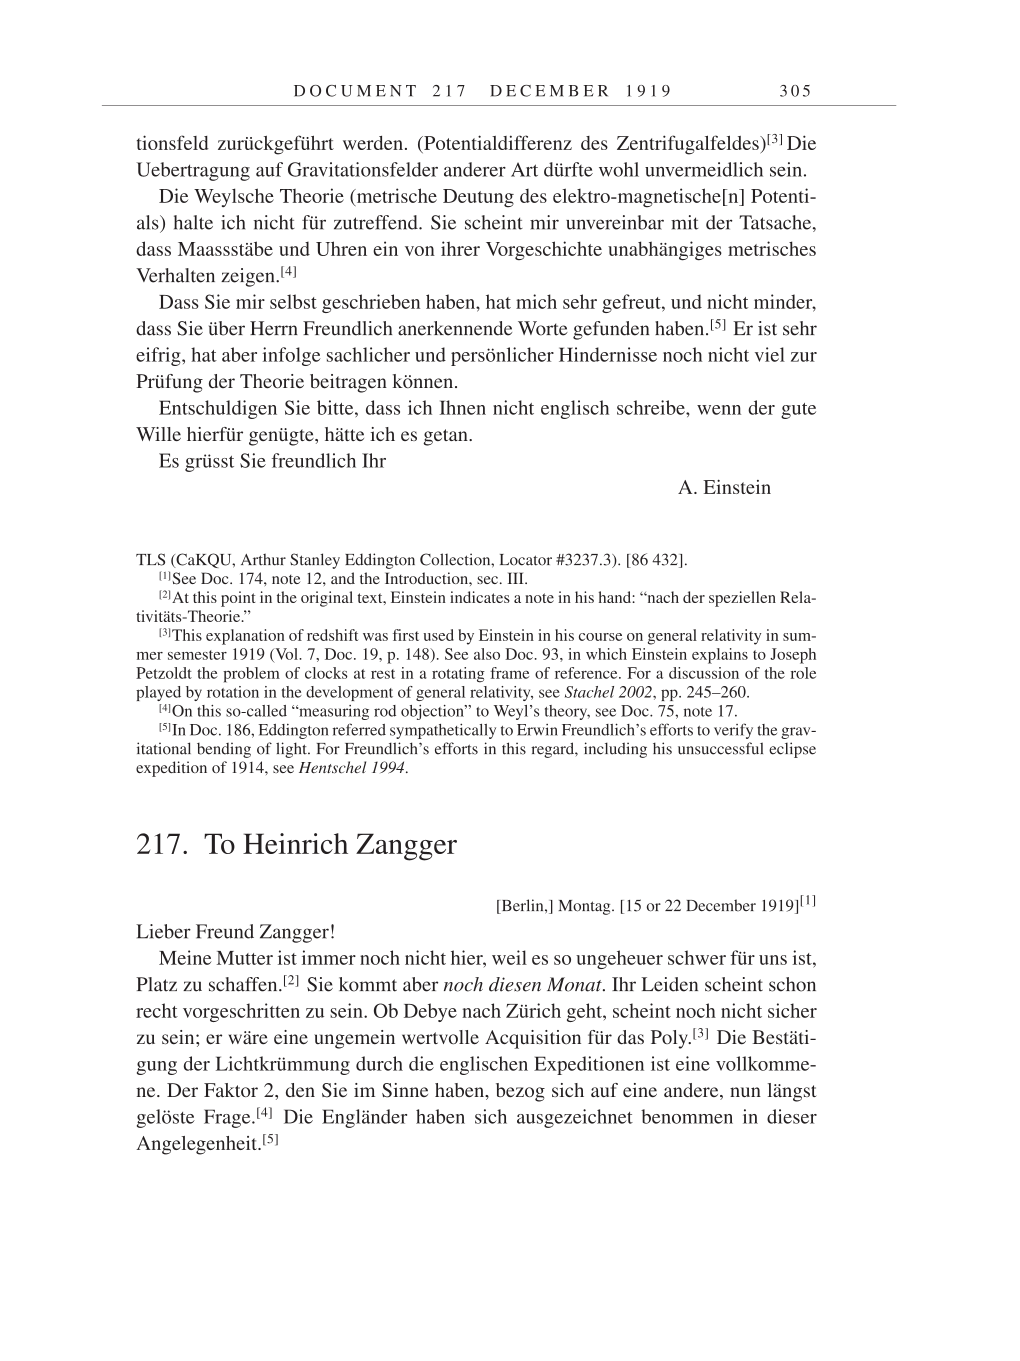 Volume 9: The Berlin Years: Correspondence January 1919-April 1920 page 305